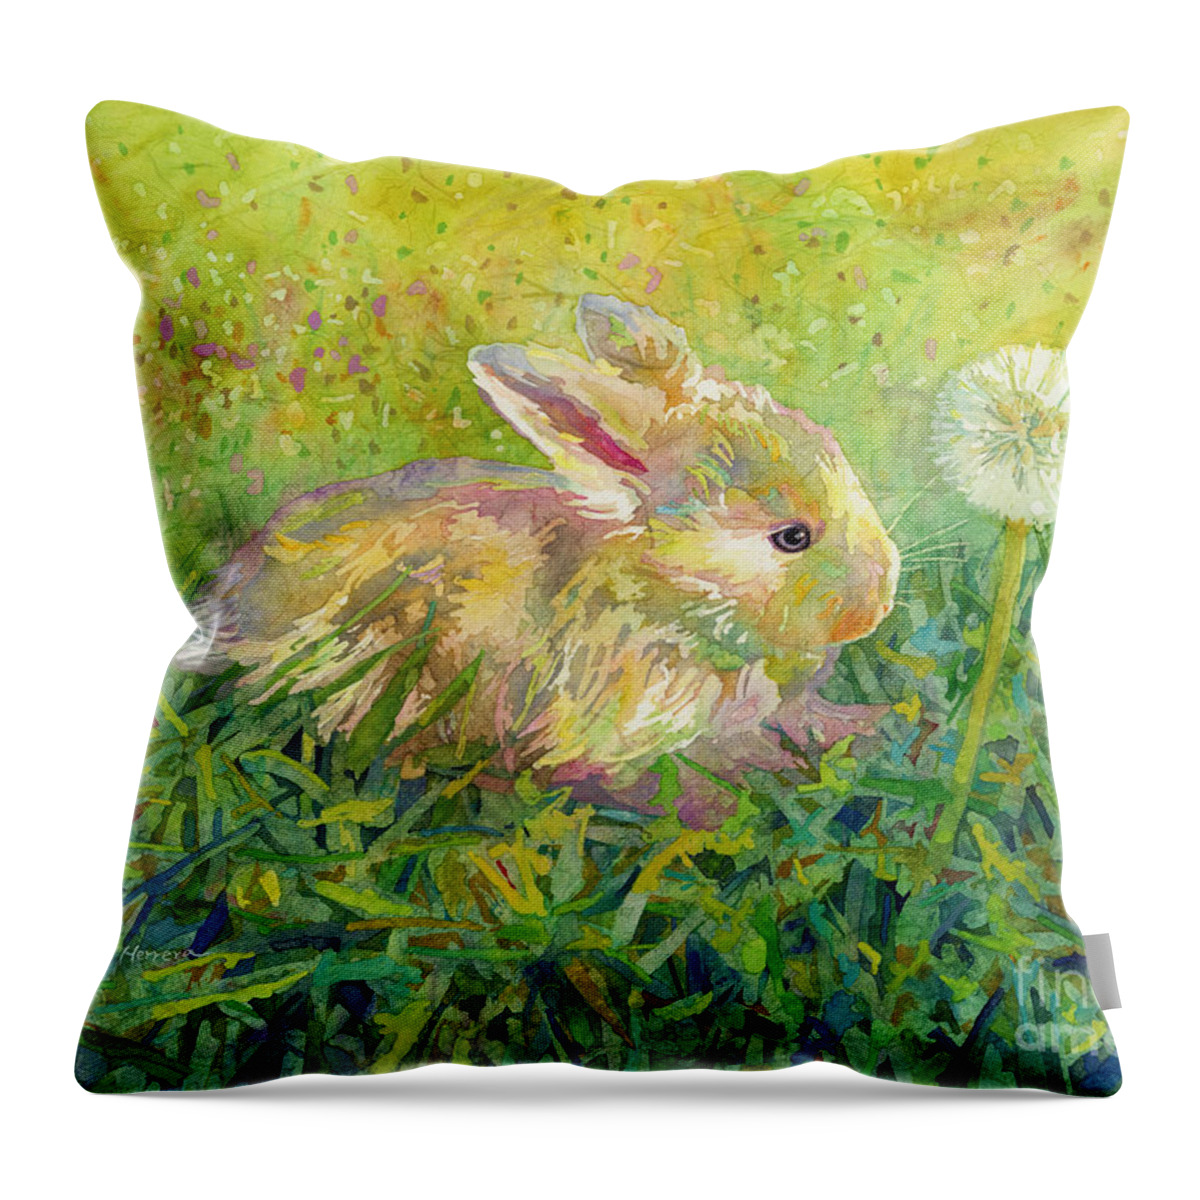 Rabbit Throw Pillow featuring the painting Gentle Wish by Hailey E Herrera